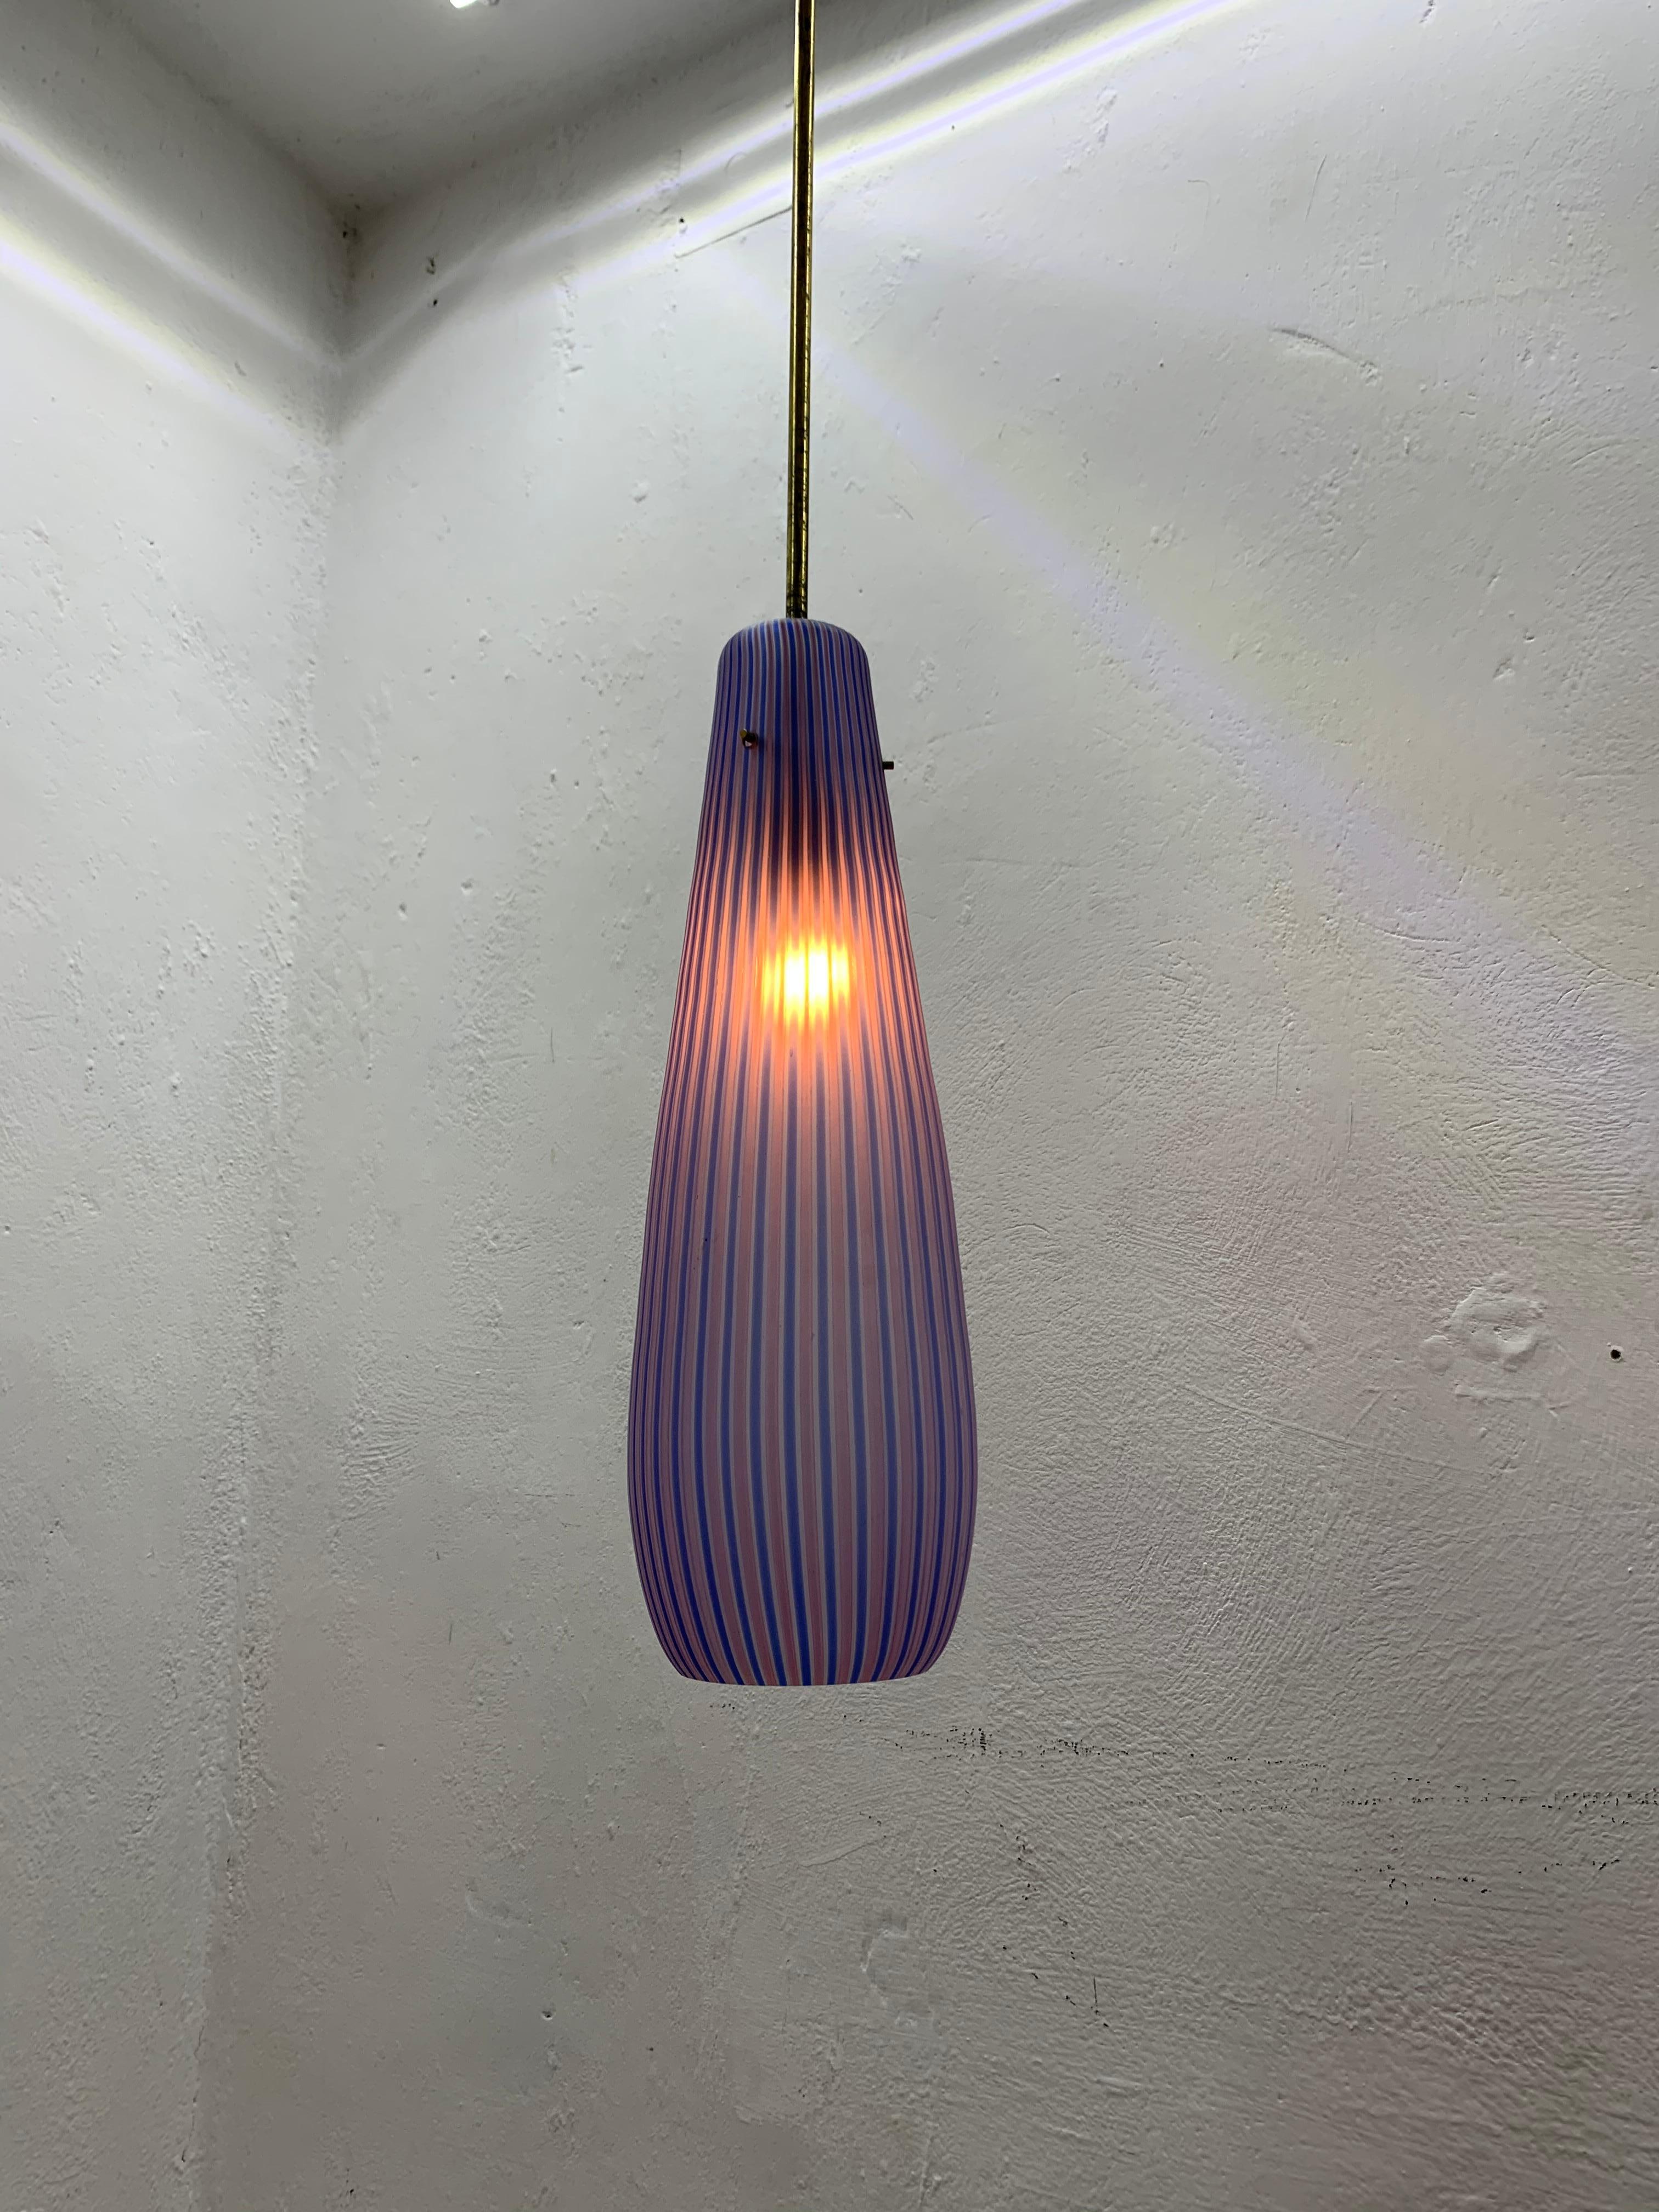 Beautiful Mid-Century Modern pendant light in pink/blue/purple Murano glass in the style of Massimo Vignelli, circa 1960s 

Measurements:
Total height 45 inches
Glass shade 13.5 inches high by 5